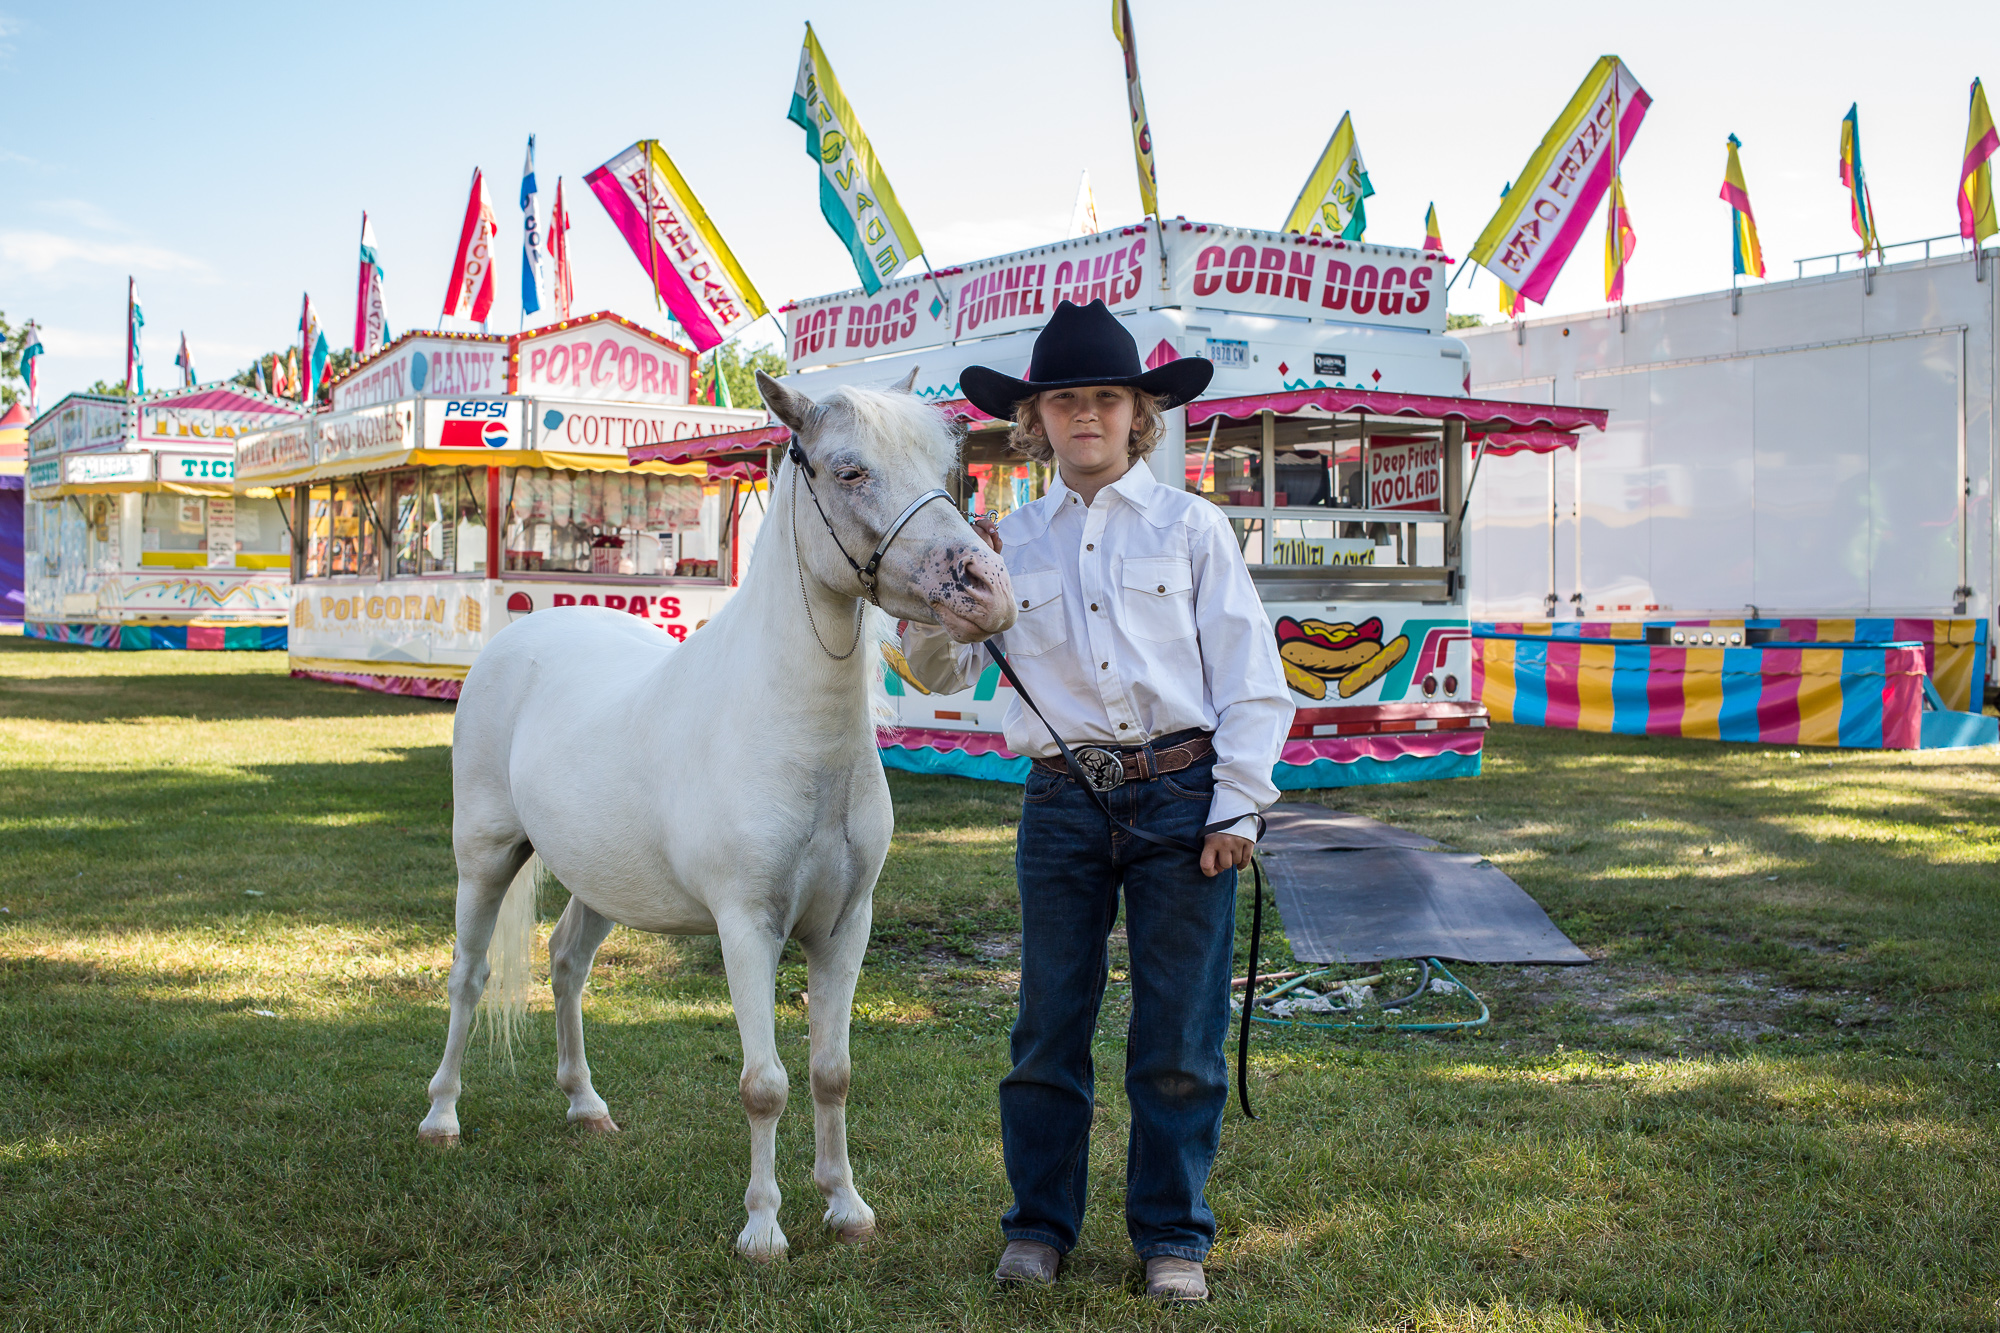  Gage Koster, 11, with Chase, a miniature Appaloosa, at the Hamilton County Fair on Wednesday, July 24, 2013 in Webster City, IA. 